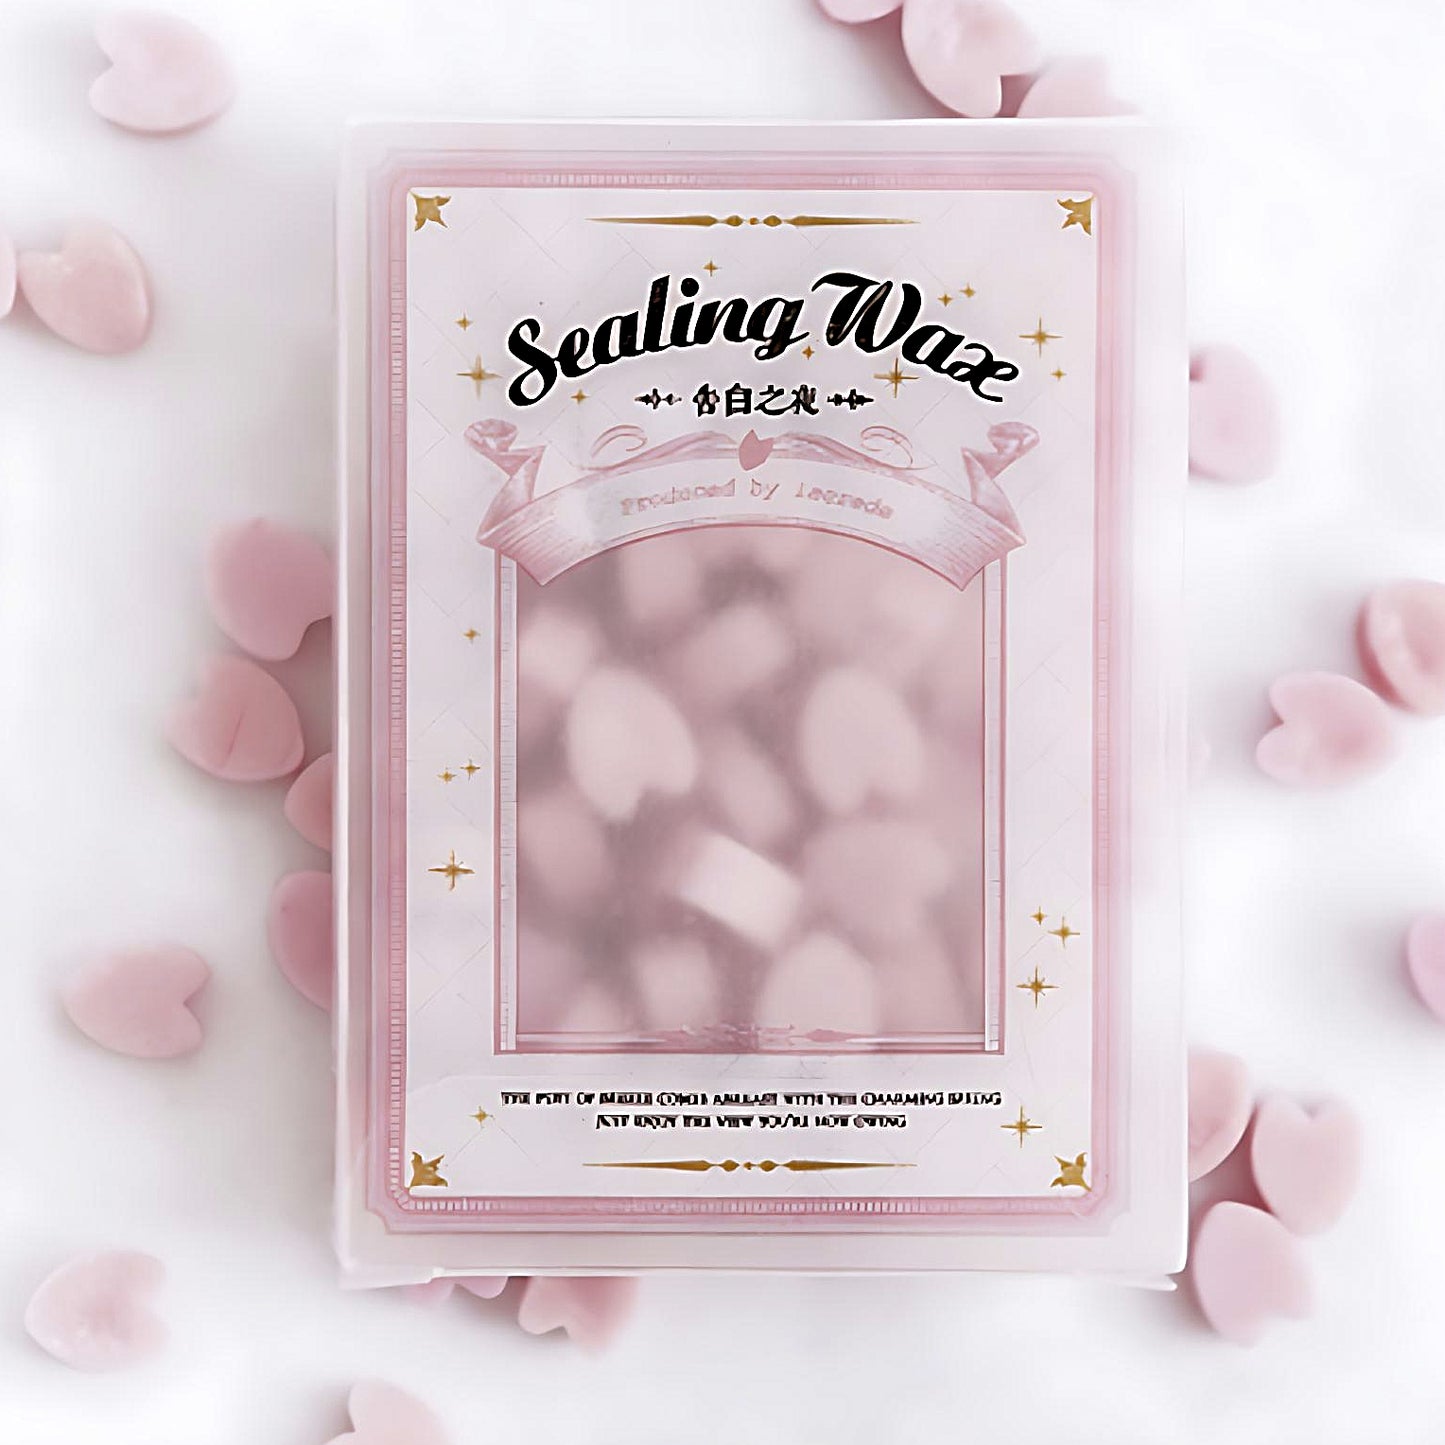 a pack of heart-shaped sealing wax in pastel pink color